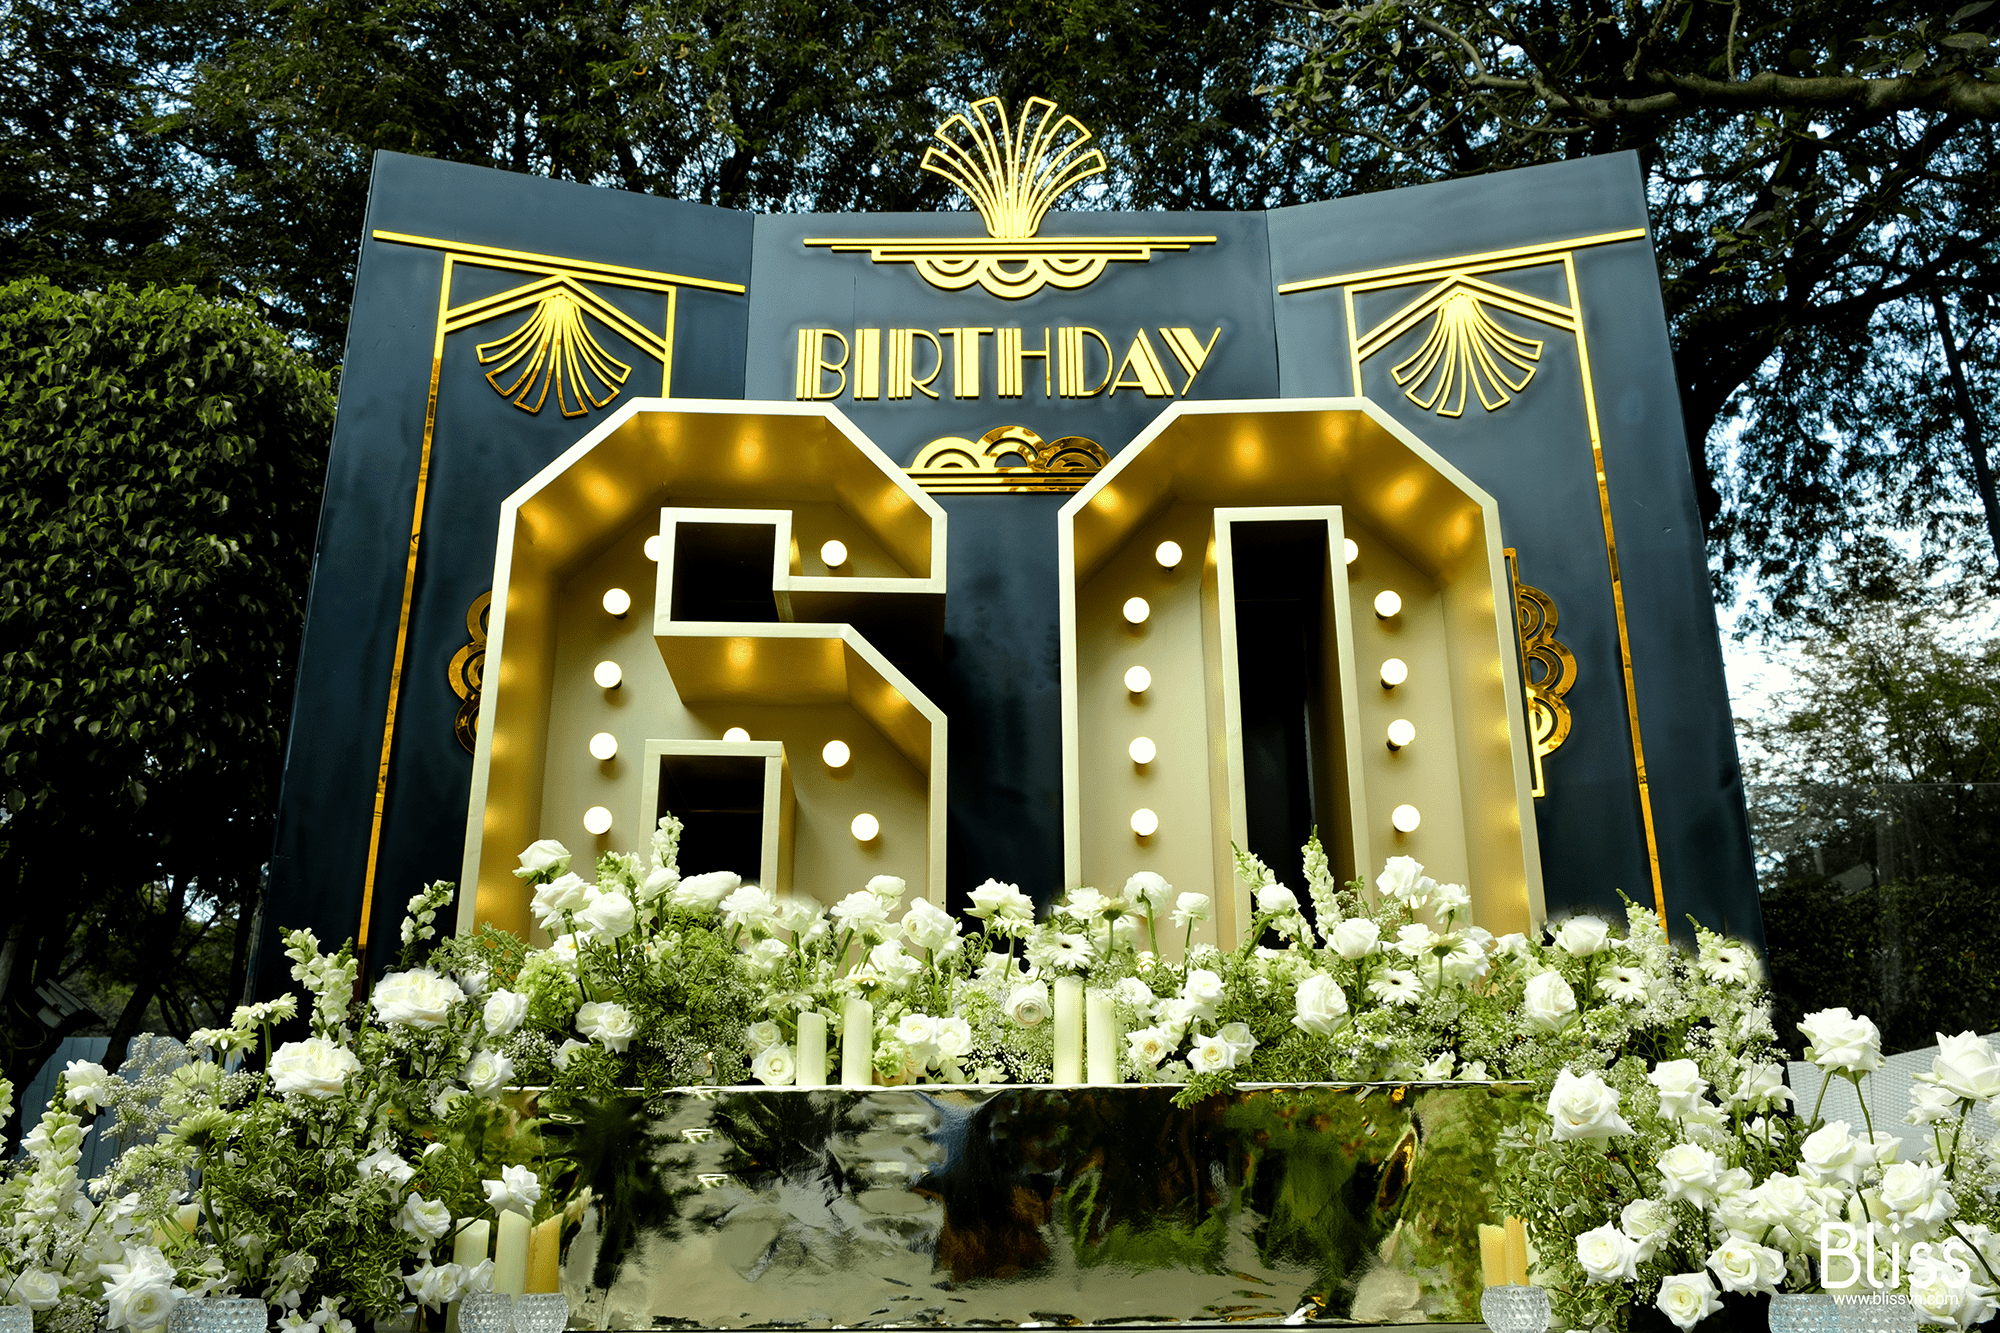 Find the perfect 60th birthday decorations for her to make her day special